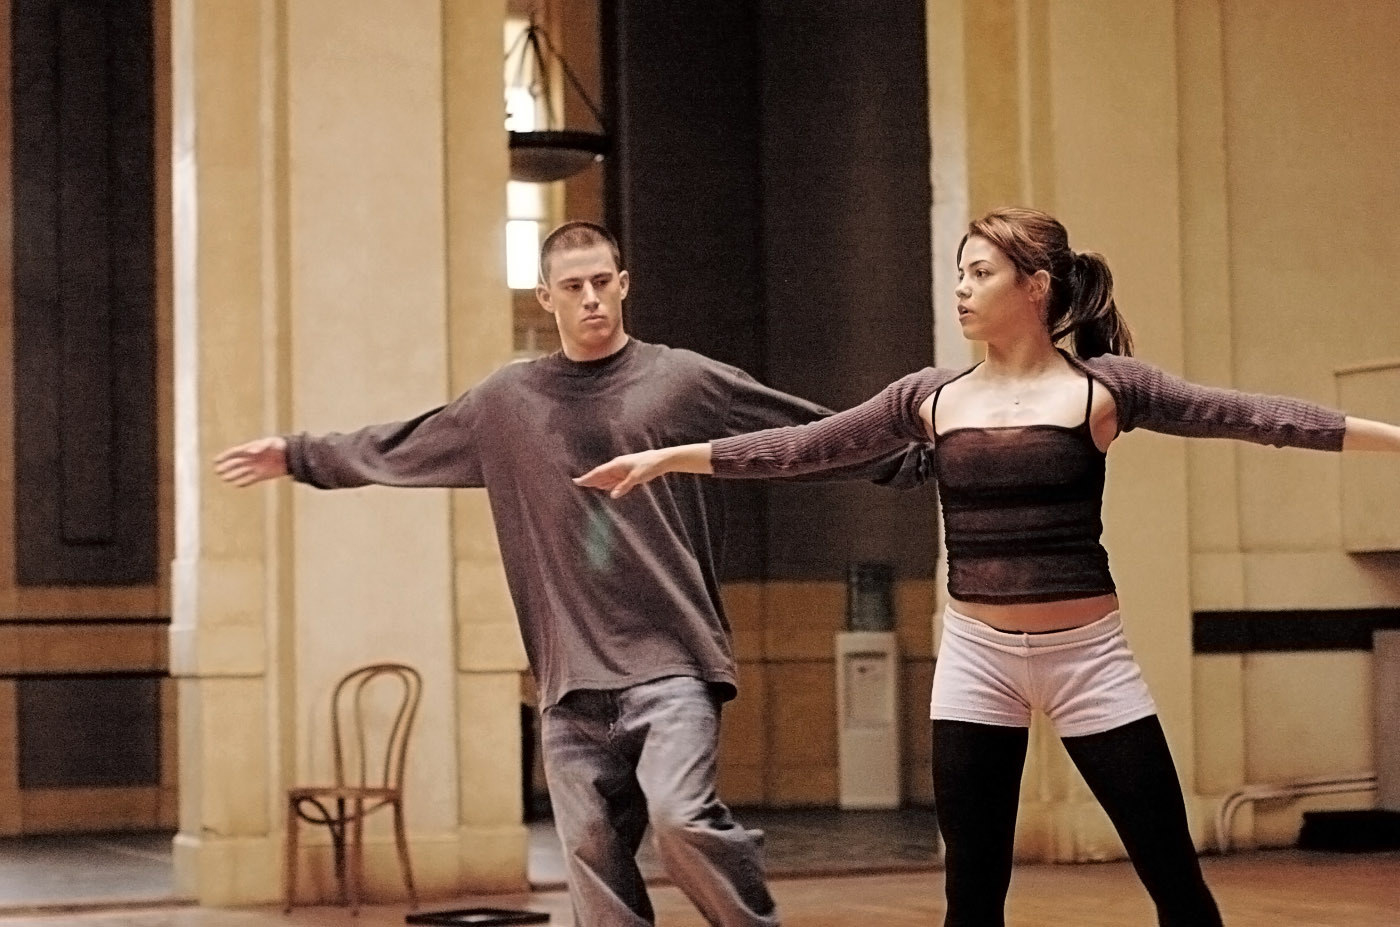 Channing Tatum learning some ballet moves in &quot;Step Up&quot;